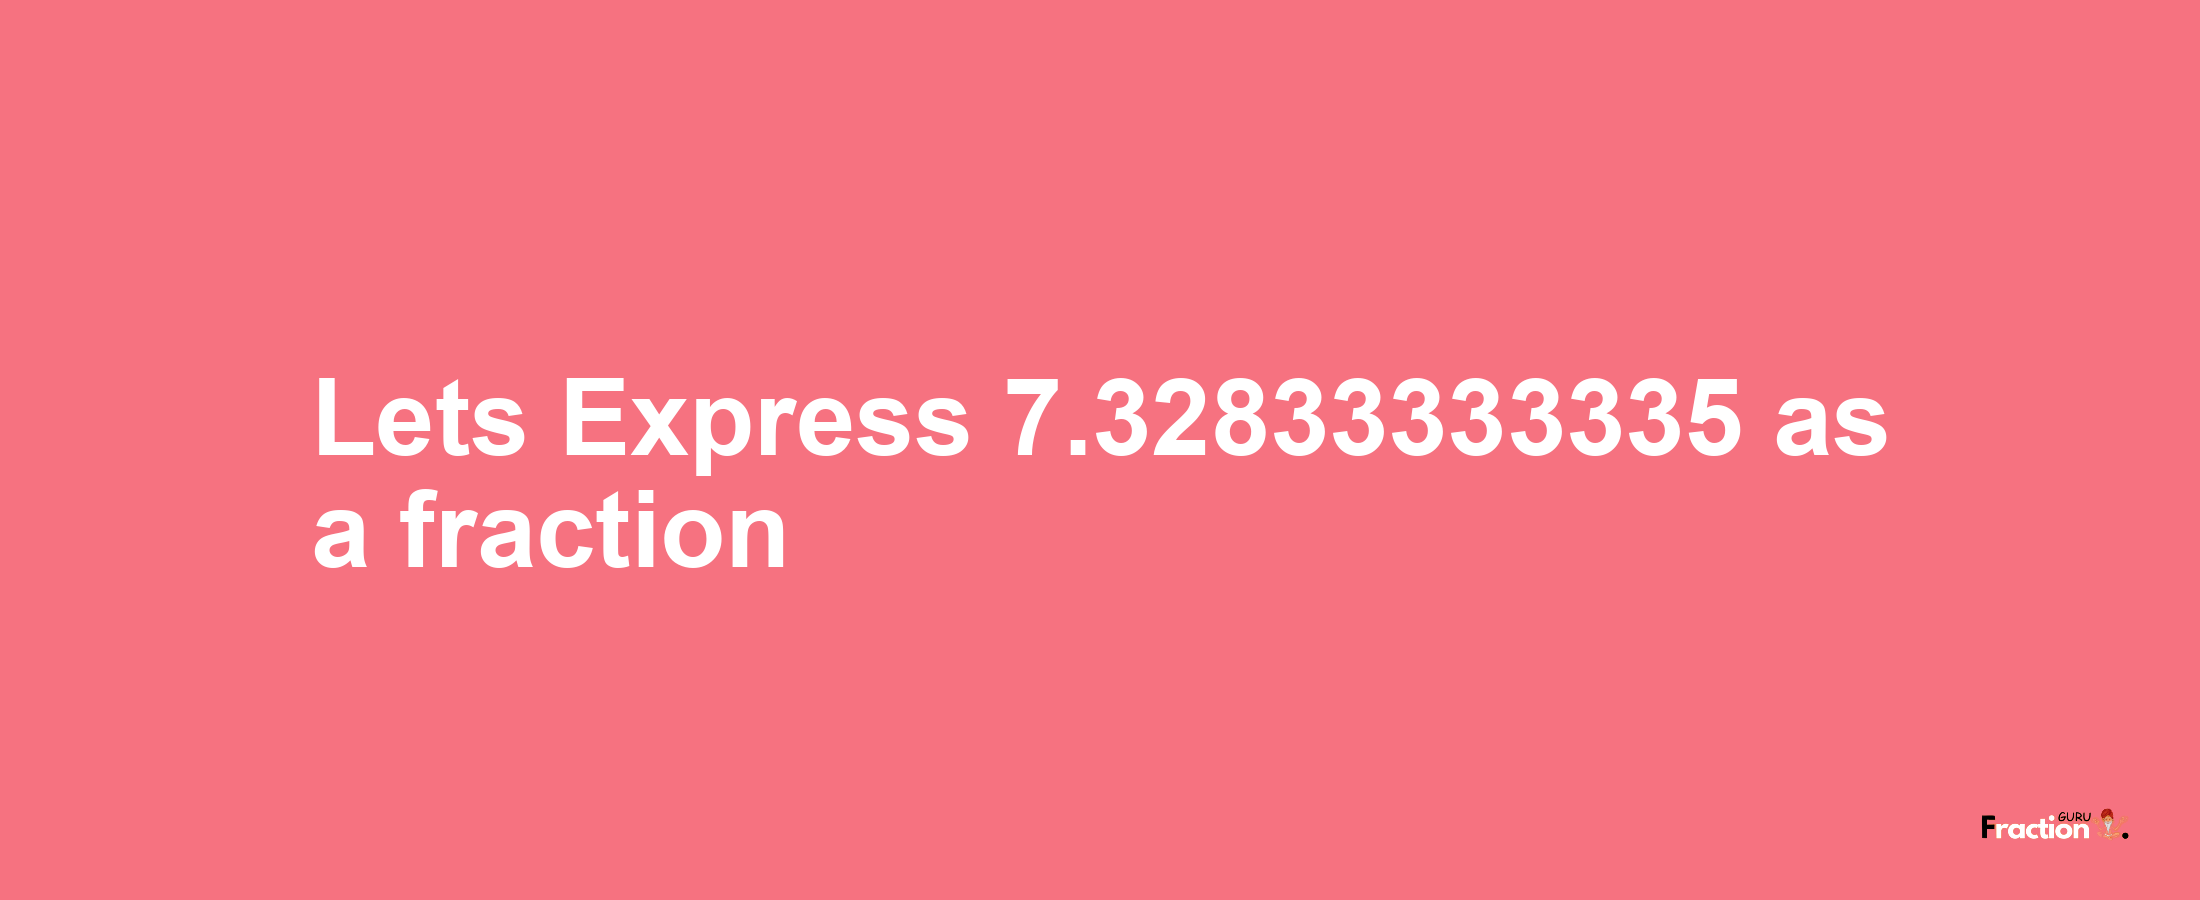 Lets Express 7.32833333335 as afraction